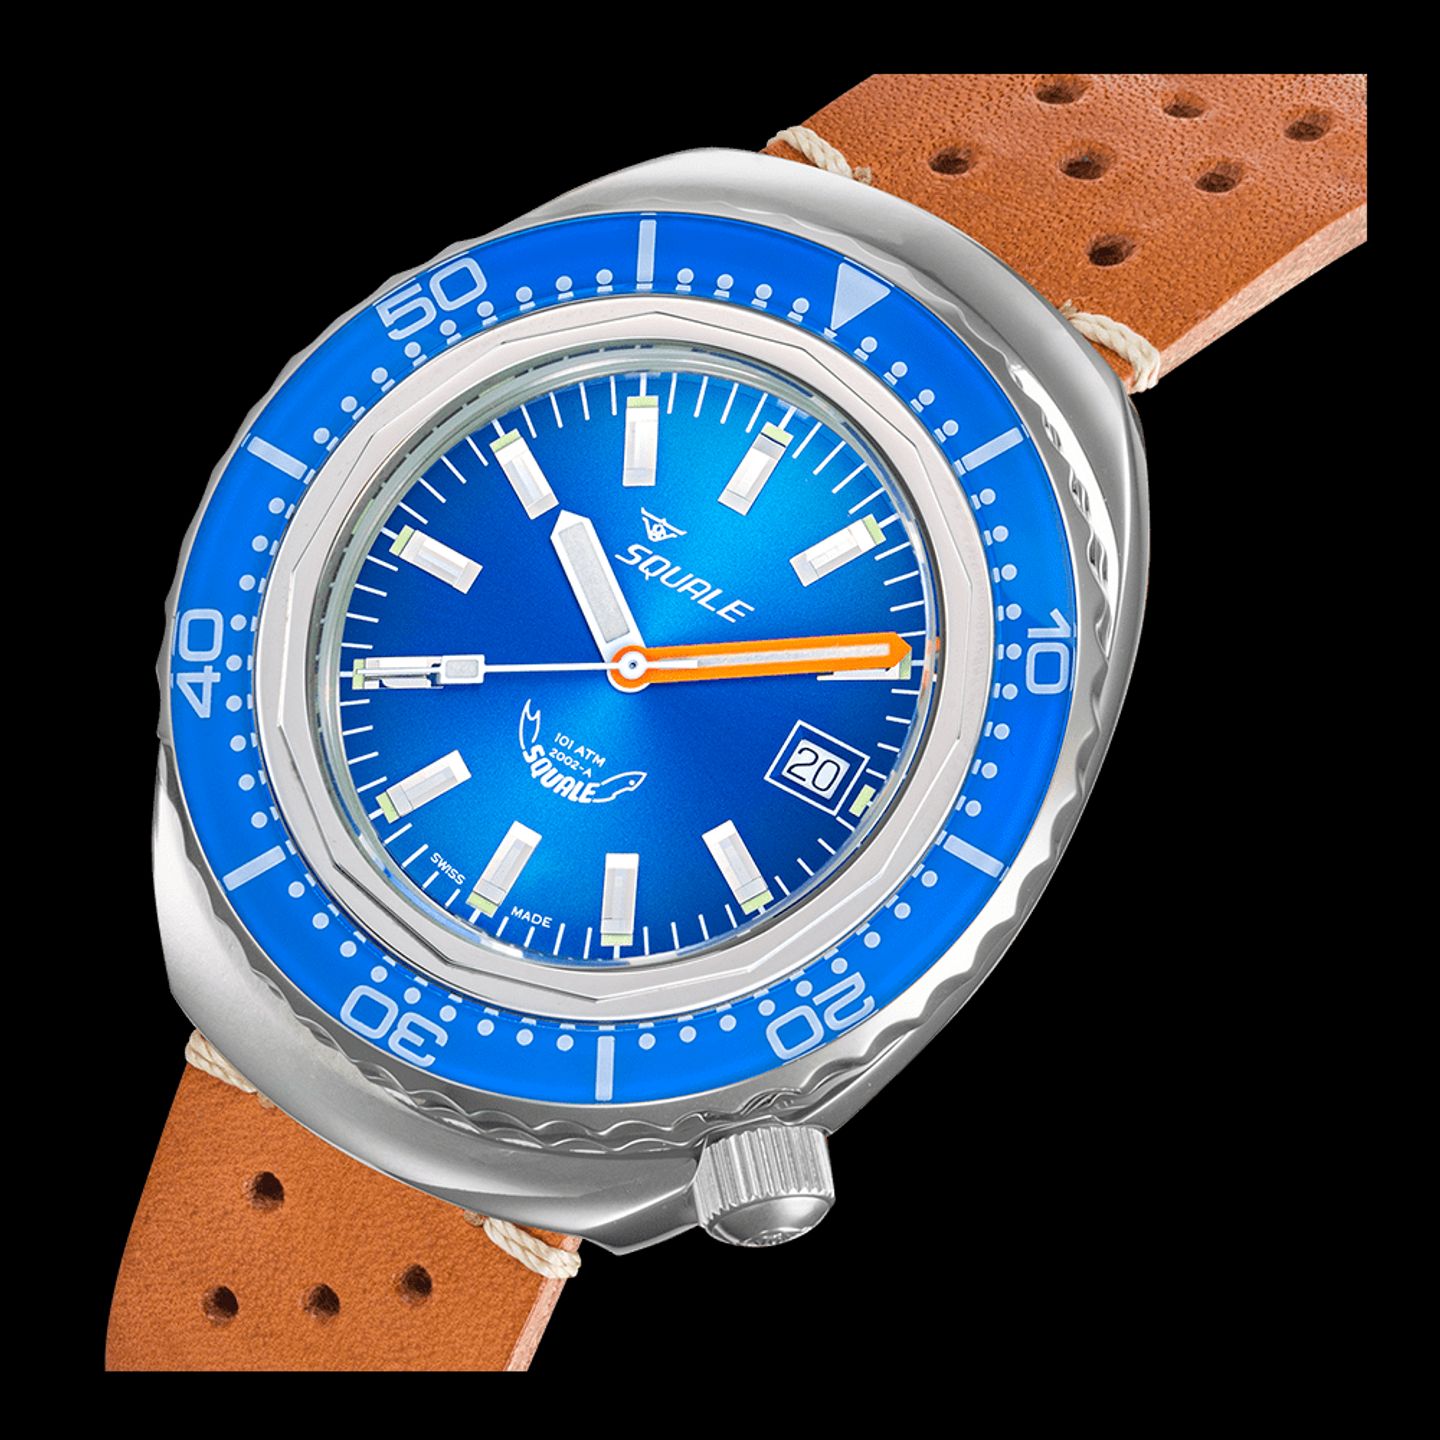 Squale 2002 2002 blue leather (2024) - Blauw wijzerplaat 44mm Staal (2/4)